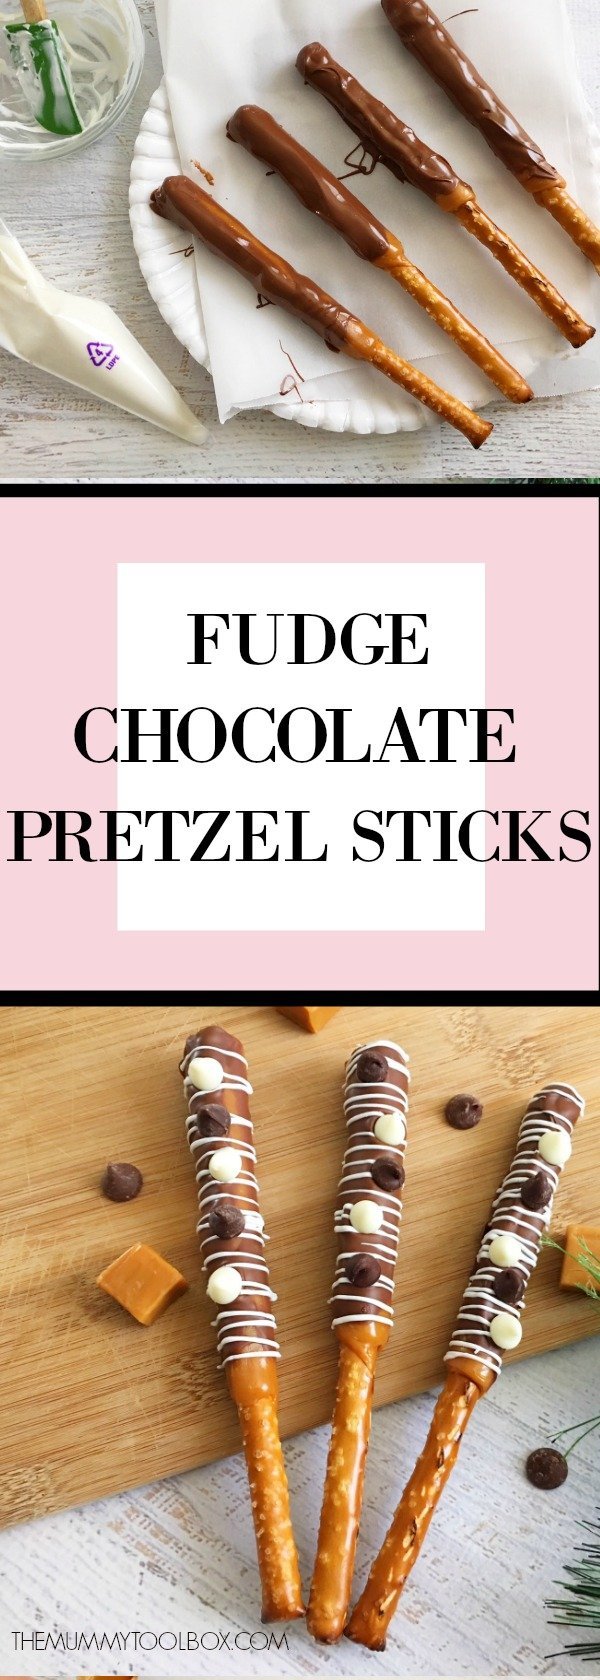 Fudge chocolate pretzel rods. Perfect party snack and delicious sweet and salty. #entertaiingfood #food #delicious #recipeideas #recipes 